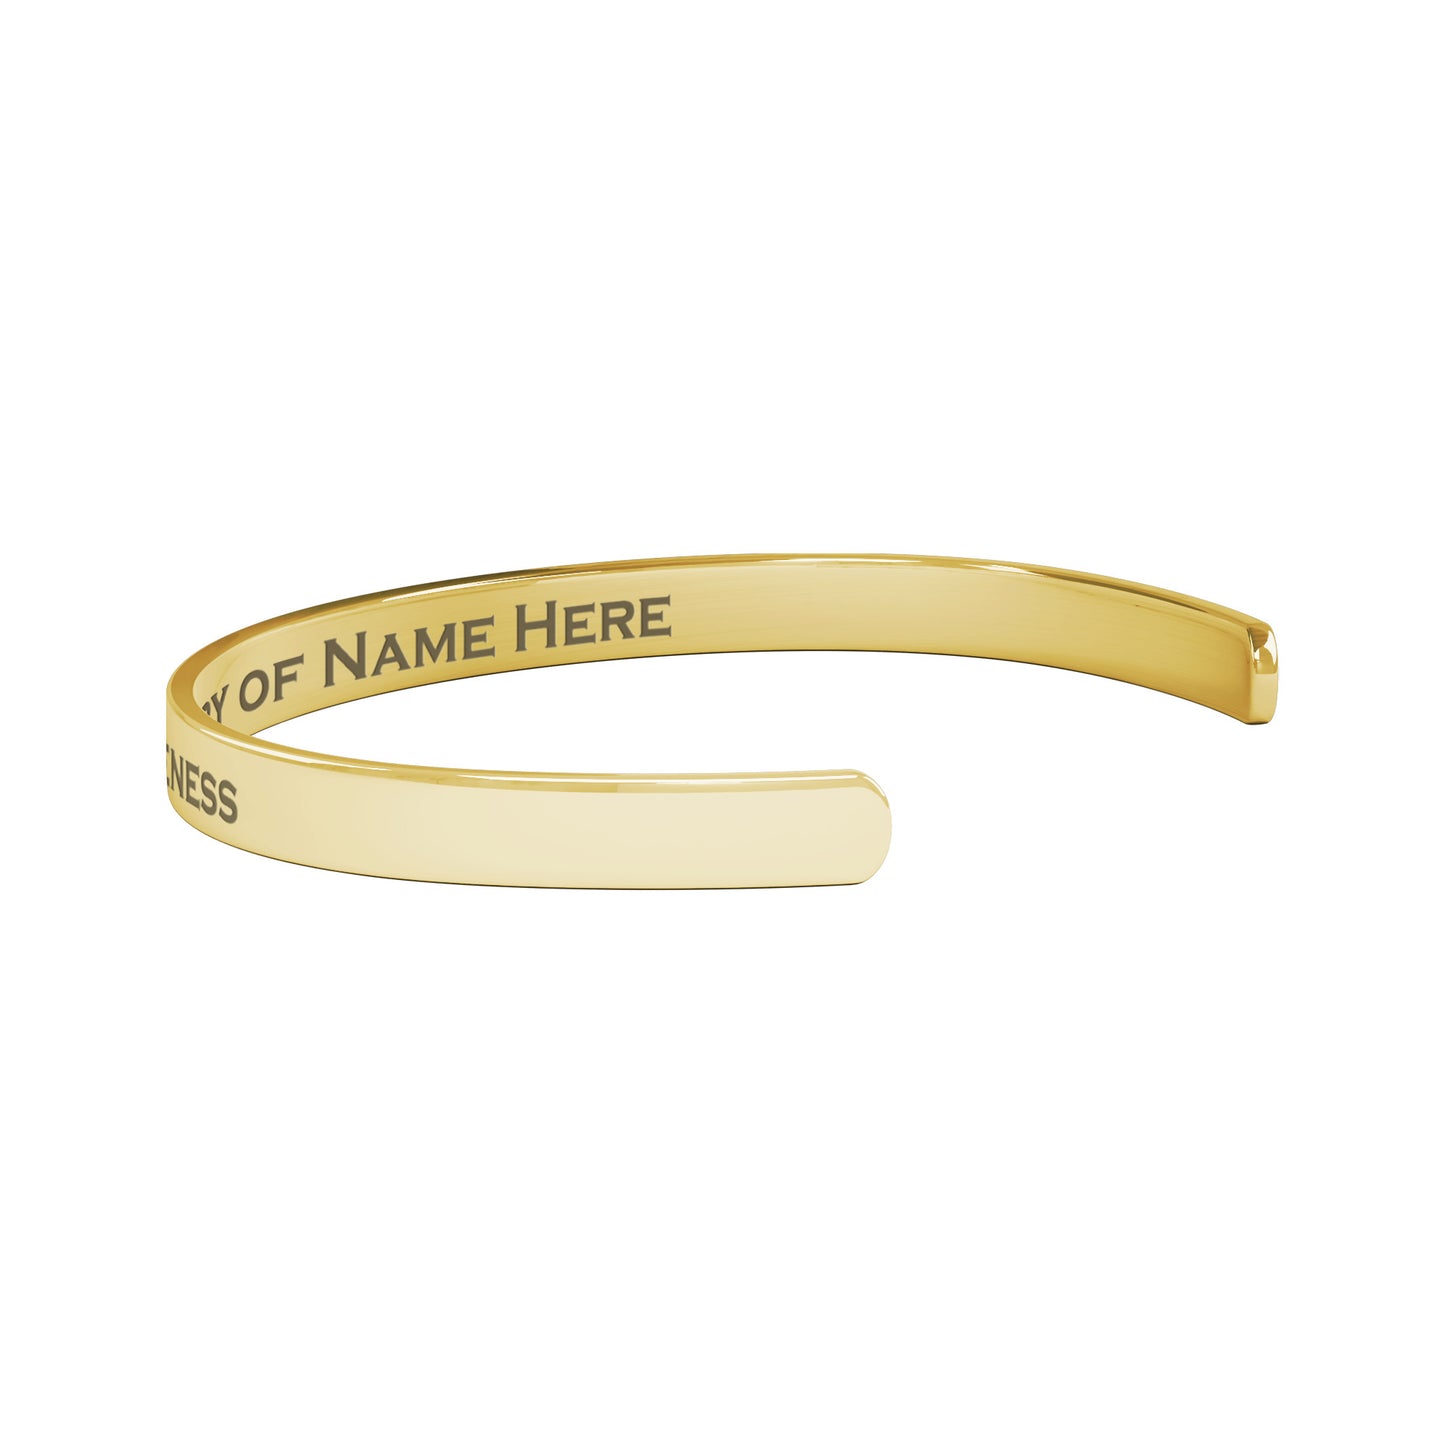 Personalized Colon Cancer Awareness Cuff Bracelet